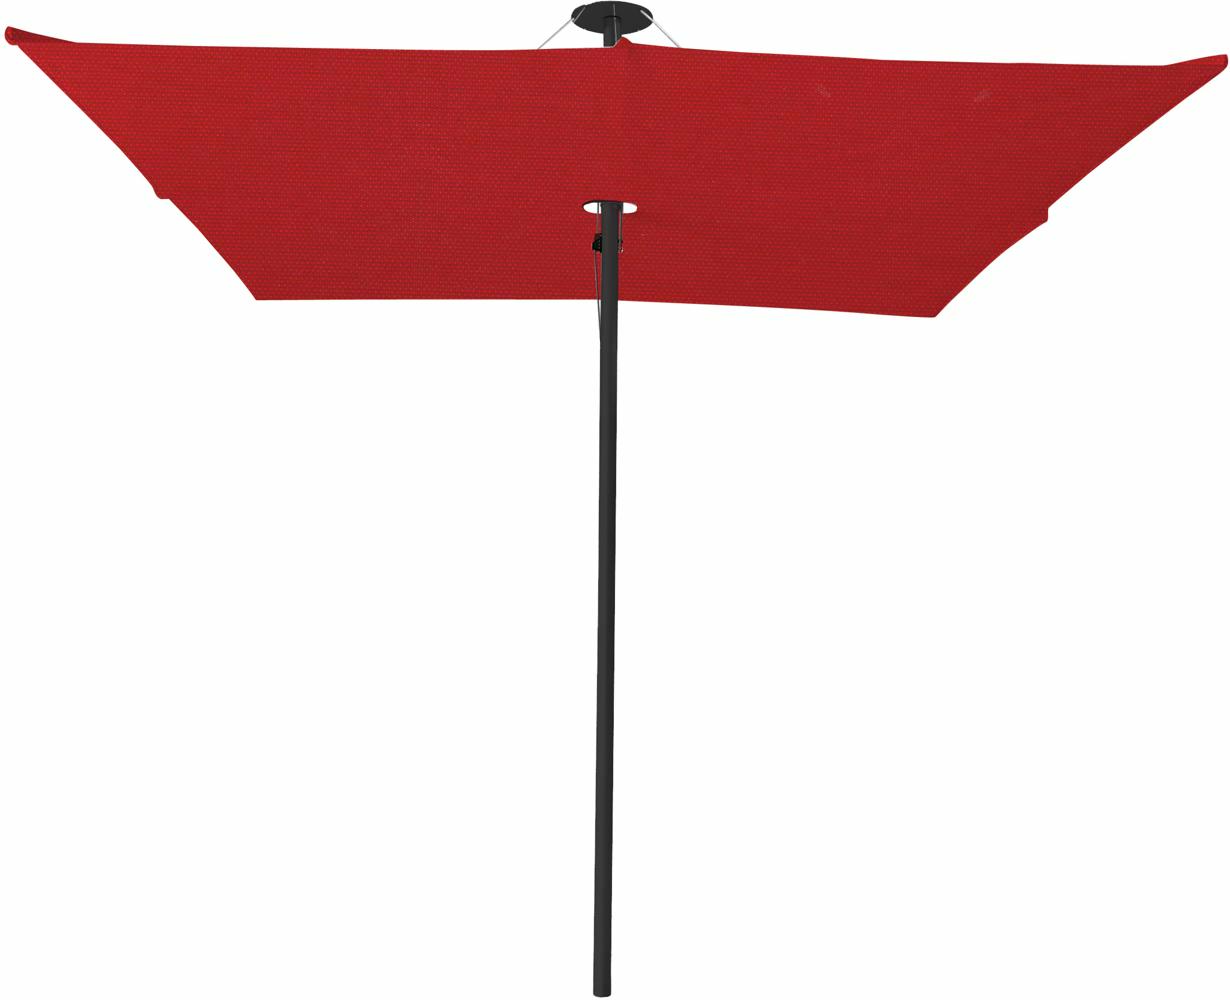 Infina center post umbrella, 3 m square, with frame in Black and Colorum Pepper canopy.